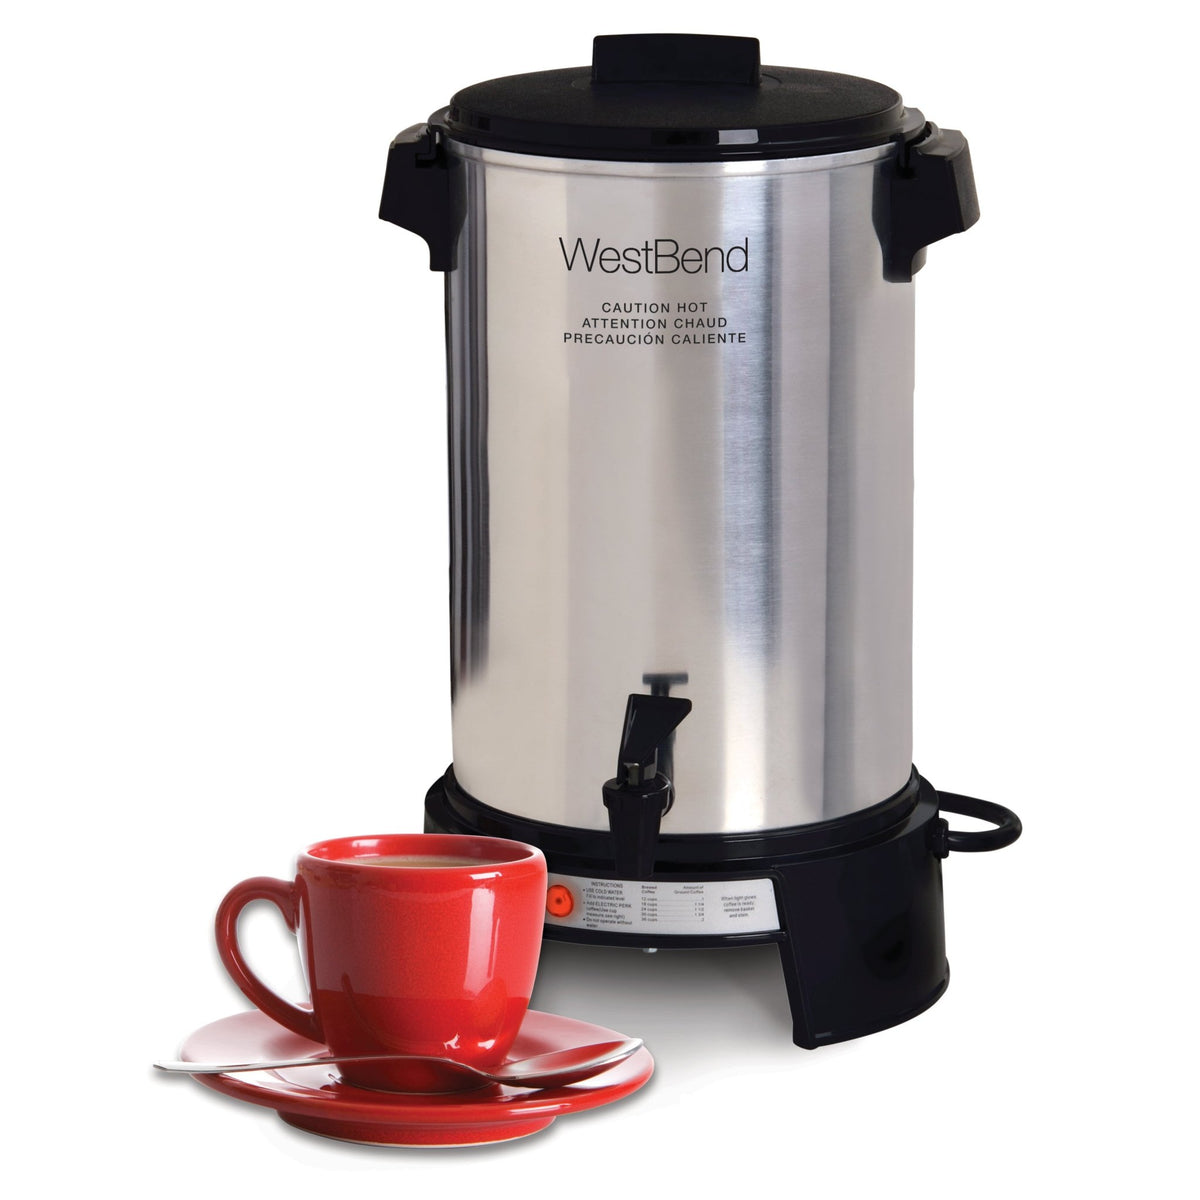 West Bend 36-Cup Commercial Coffee Urn, Large Capacity with Easy